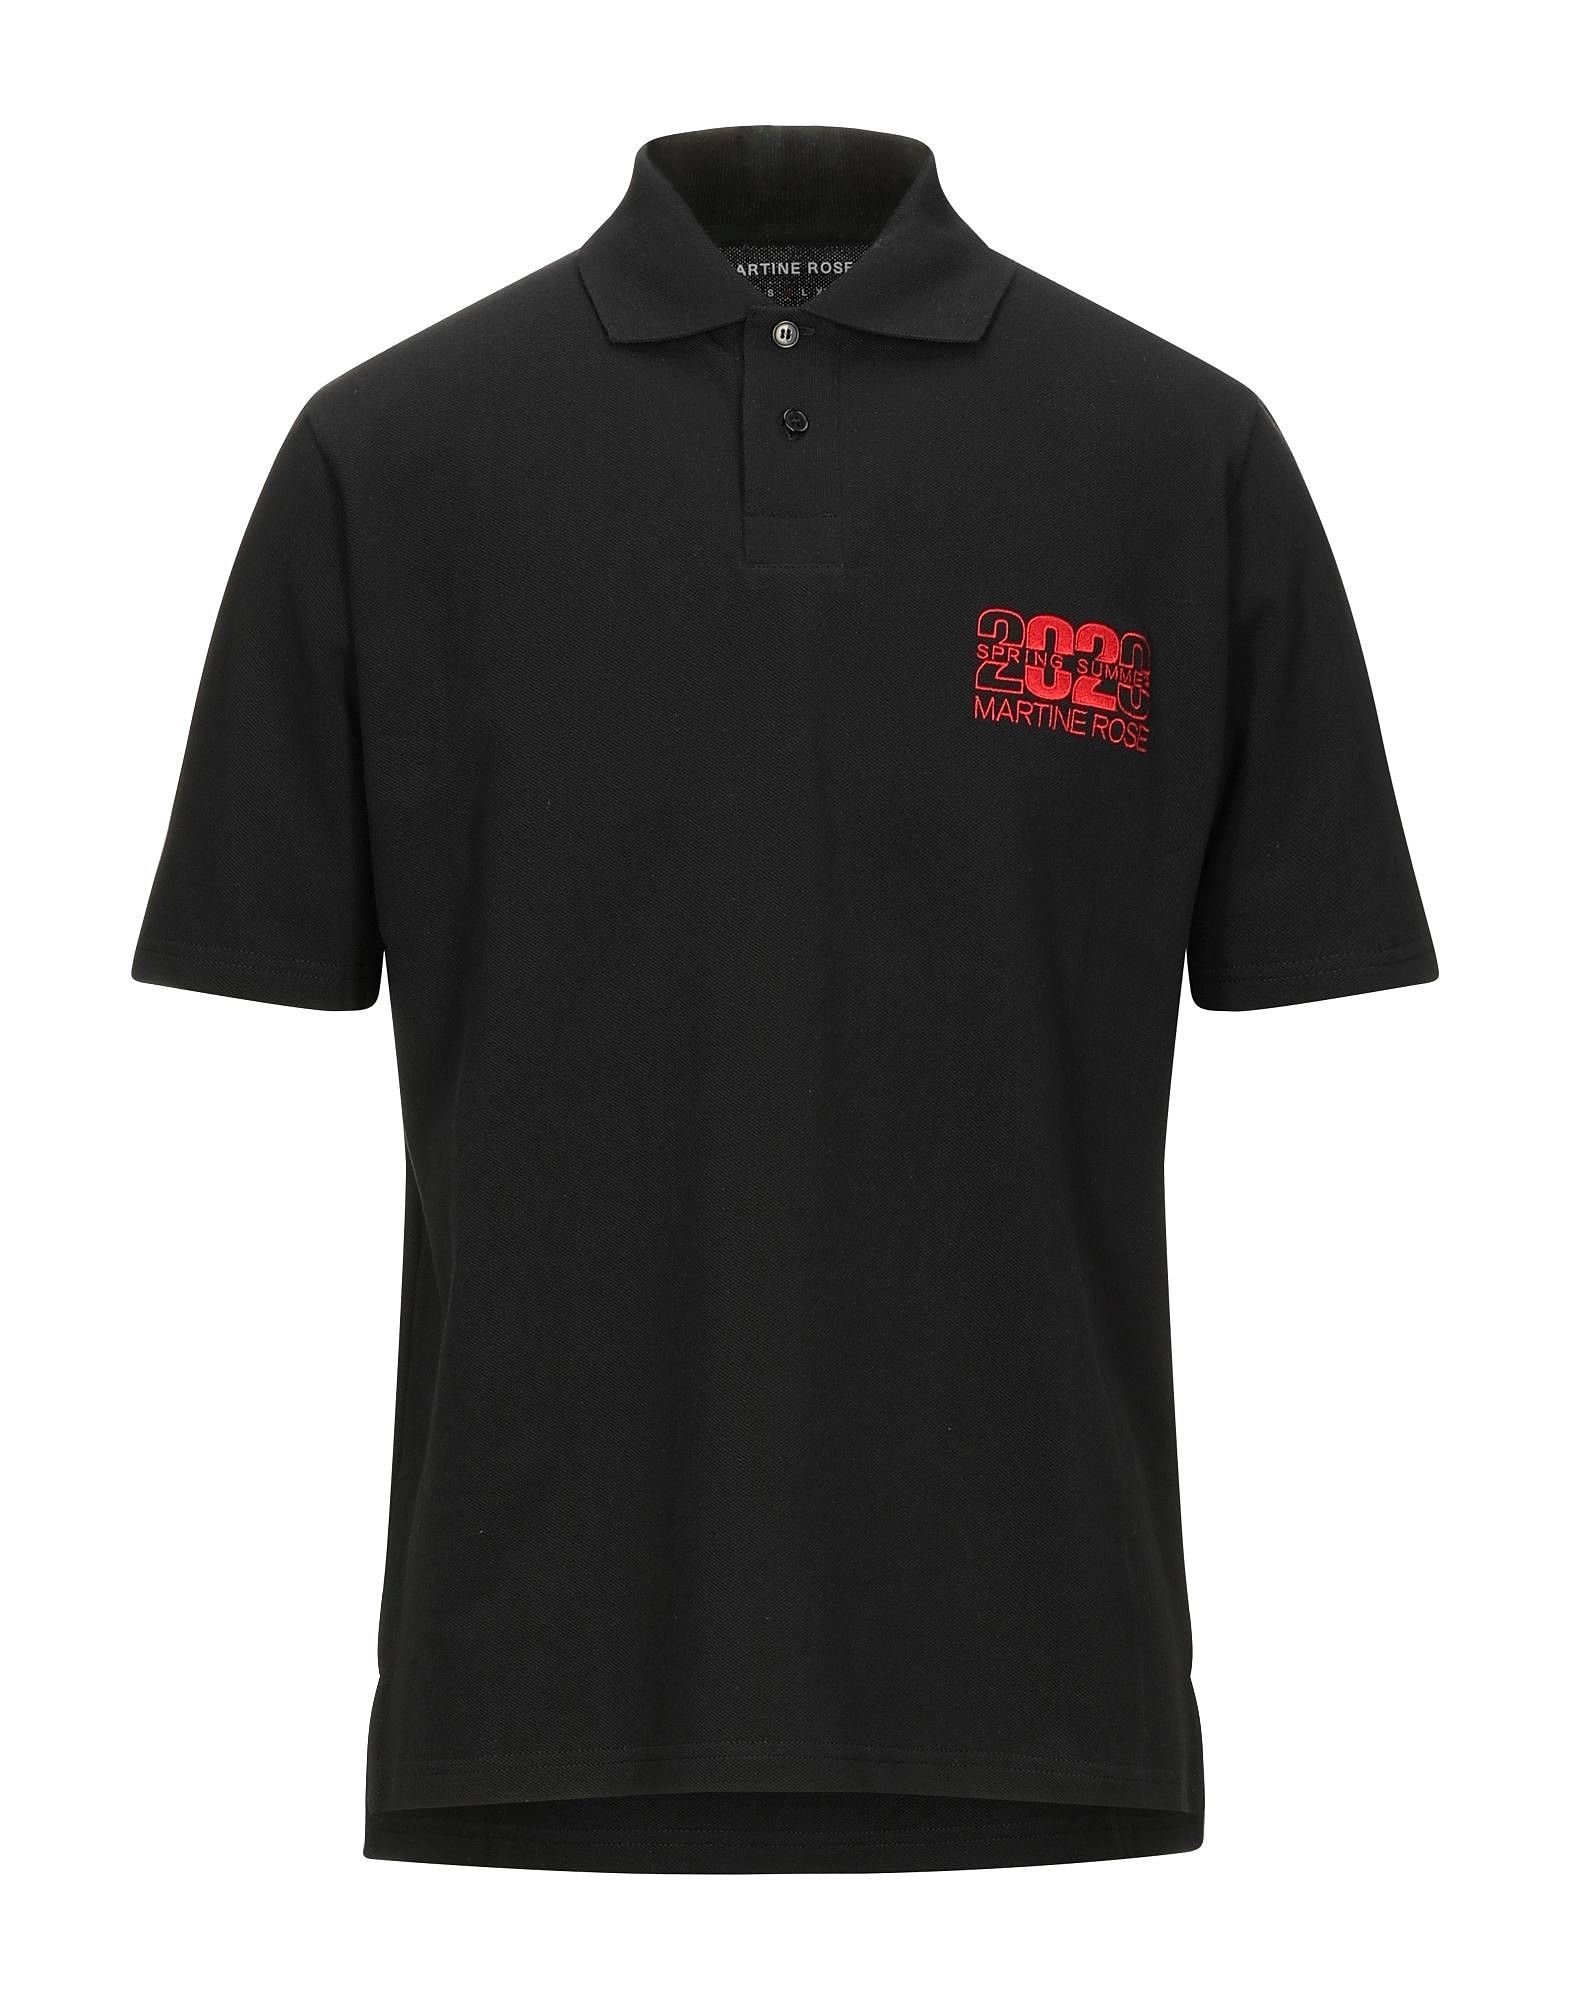 Martine Rose Polo Shirts in Black | Grailed